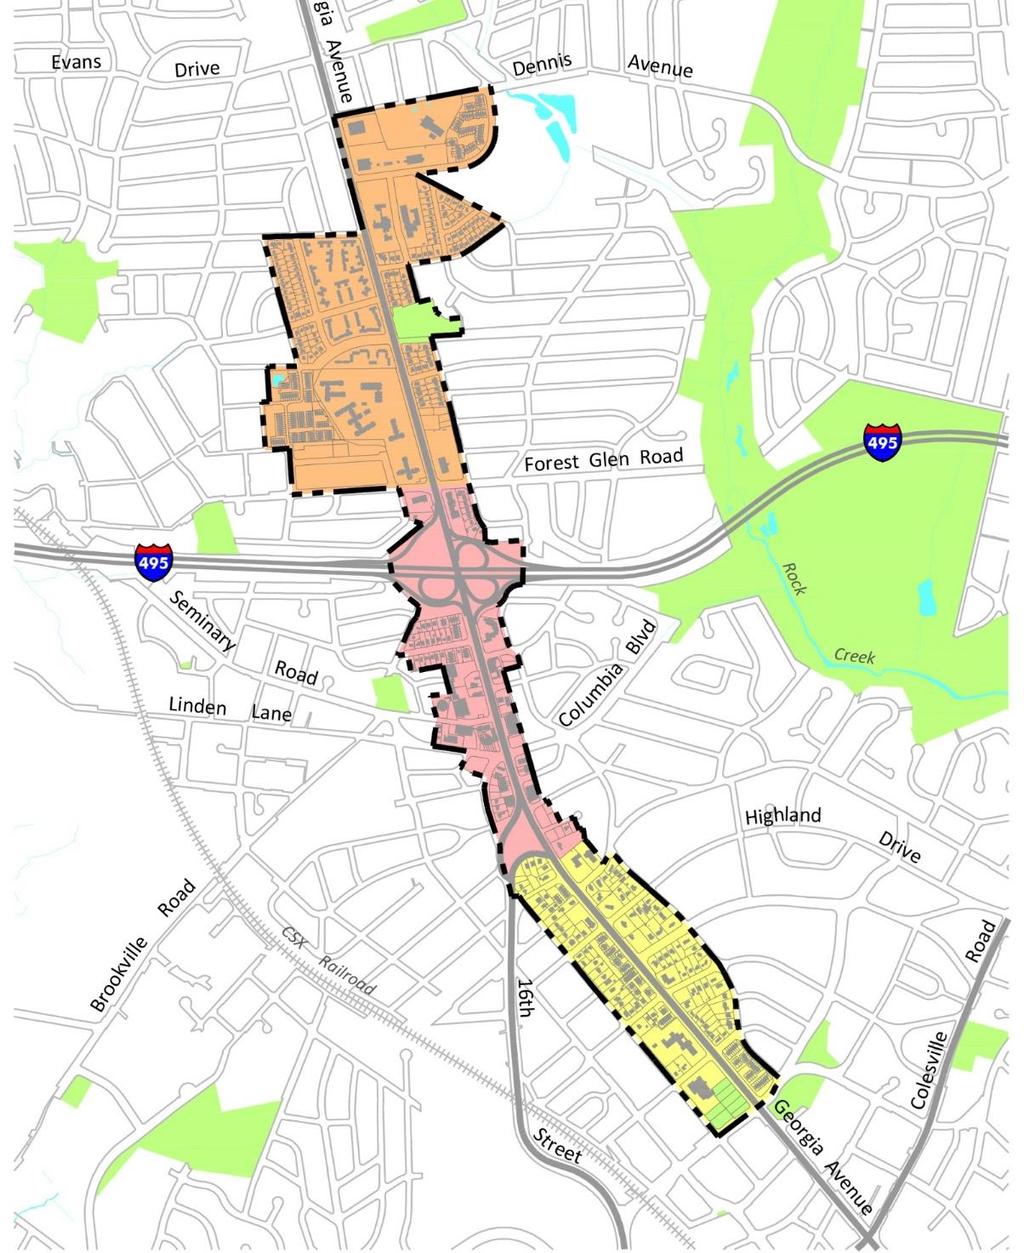 Neighborhood District Map Traffic Safety Given the high traffic volumes reported on Georgia Avenue between the plan area boundaries, it is no surprise that transportation safety for all users is a